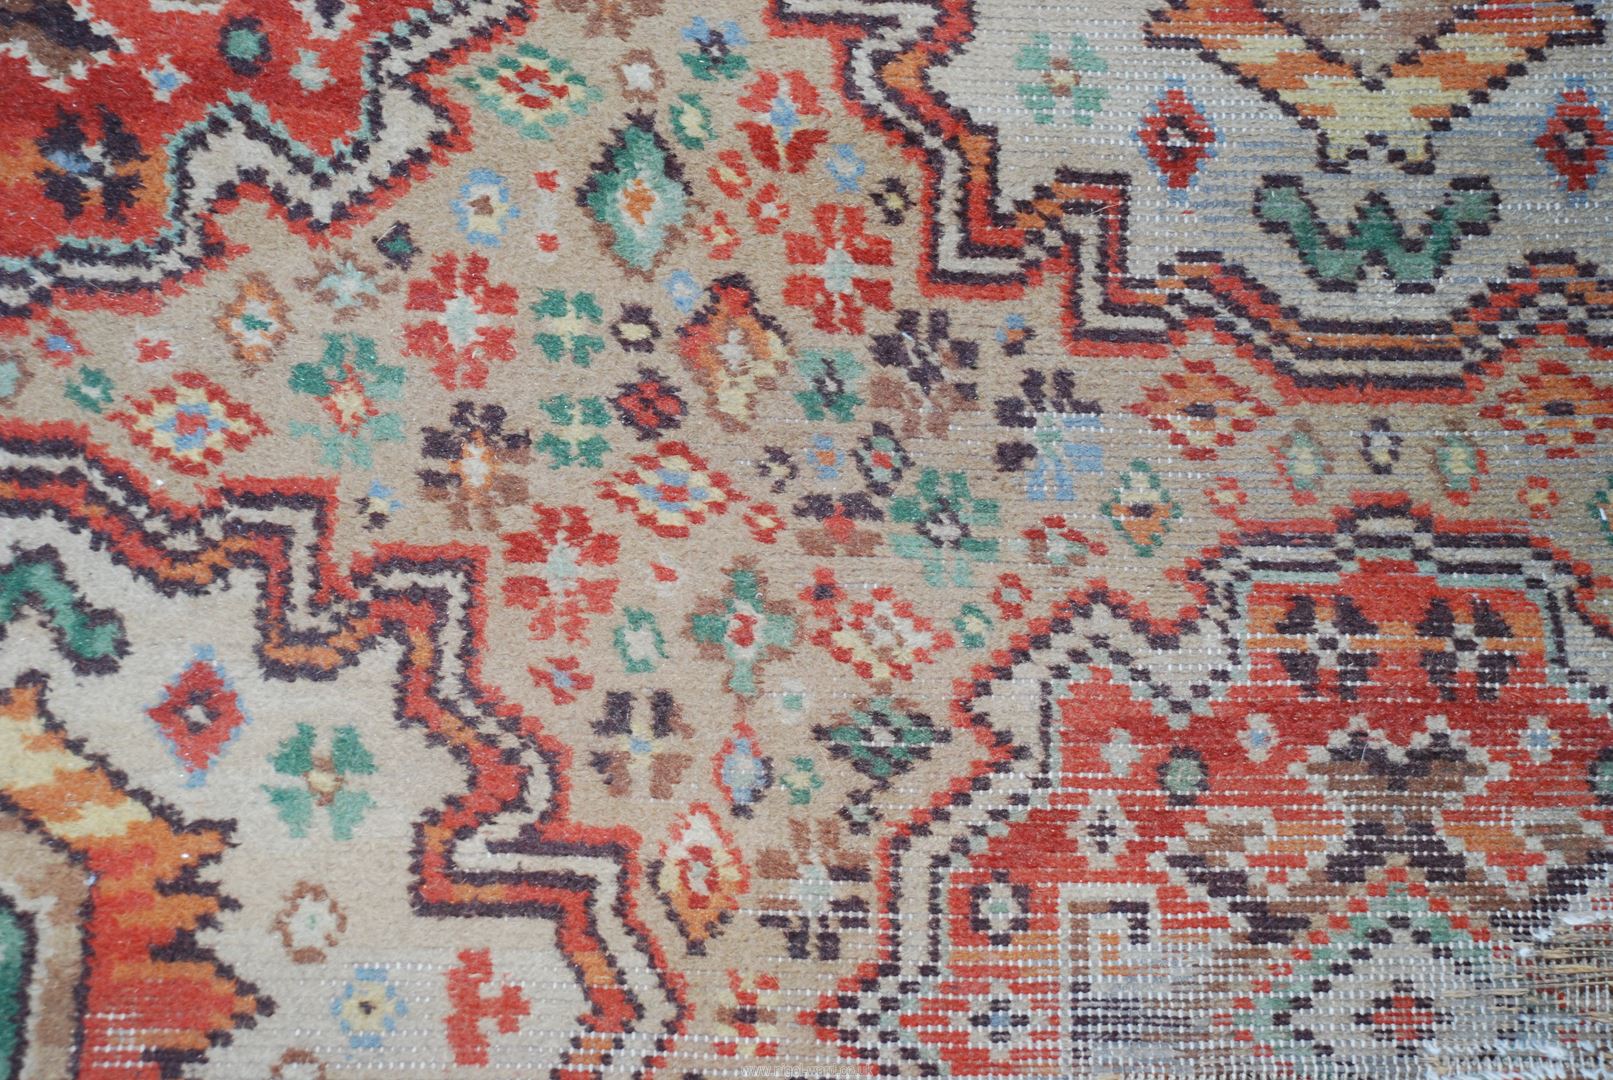 An orange and green rug, some worn areas, 122" x 90". - Image 2 of 3